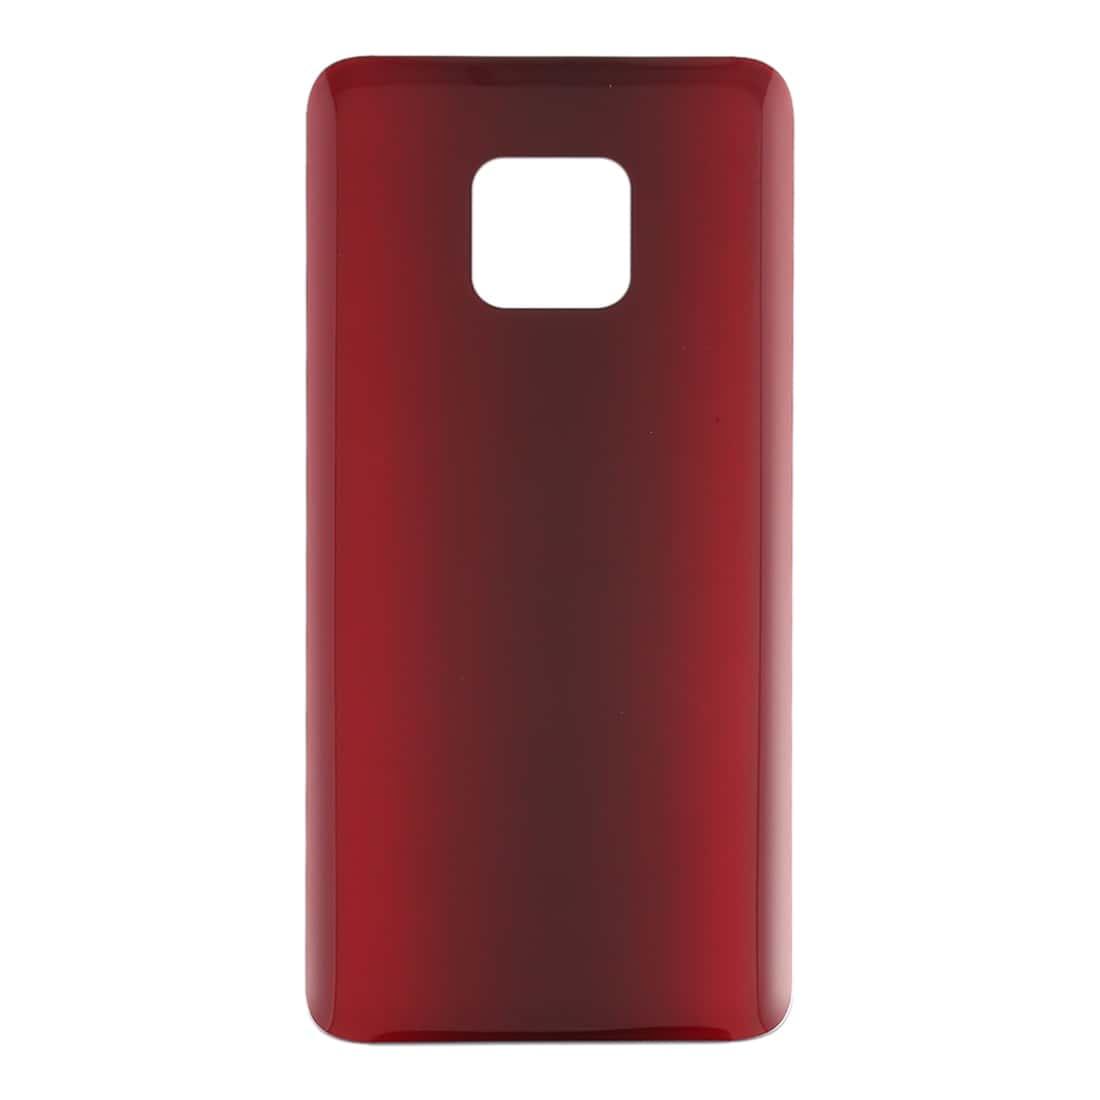 Back Glass Panel for  Huawei Mate 20 Pro Red